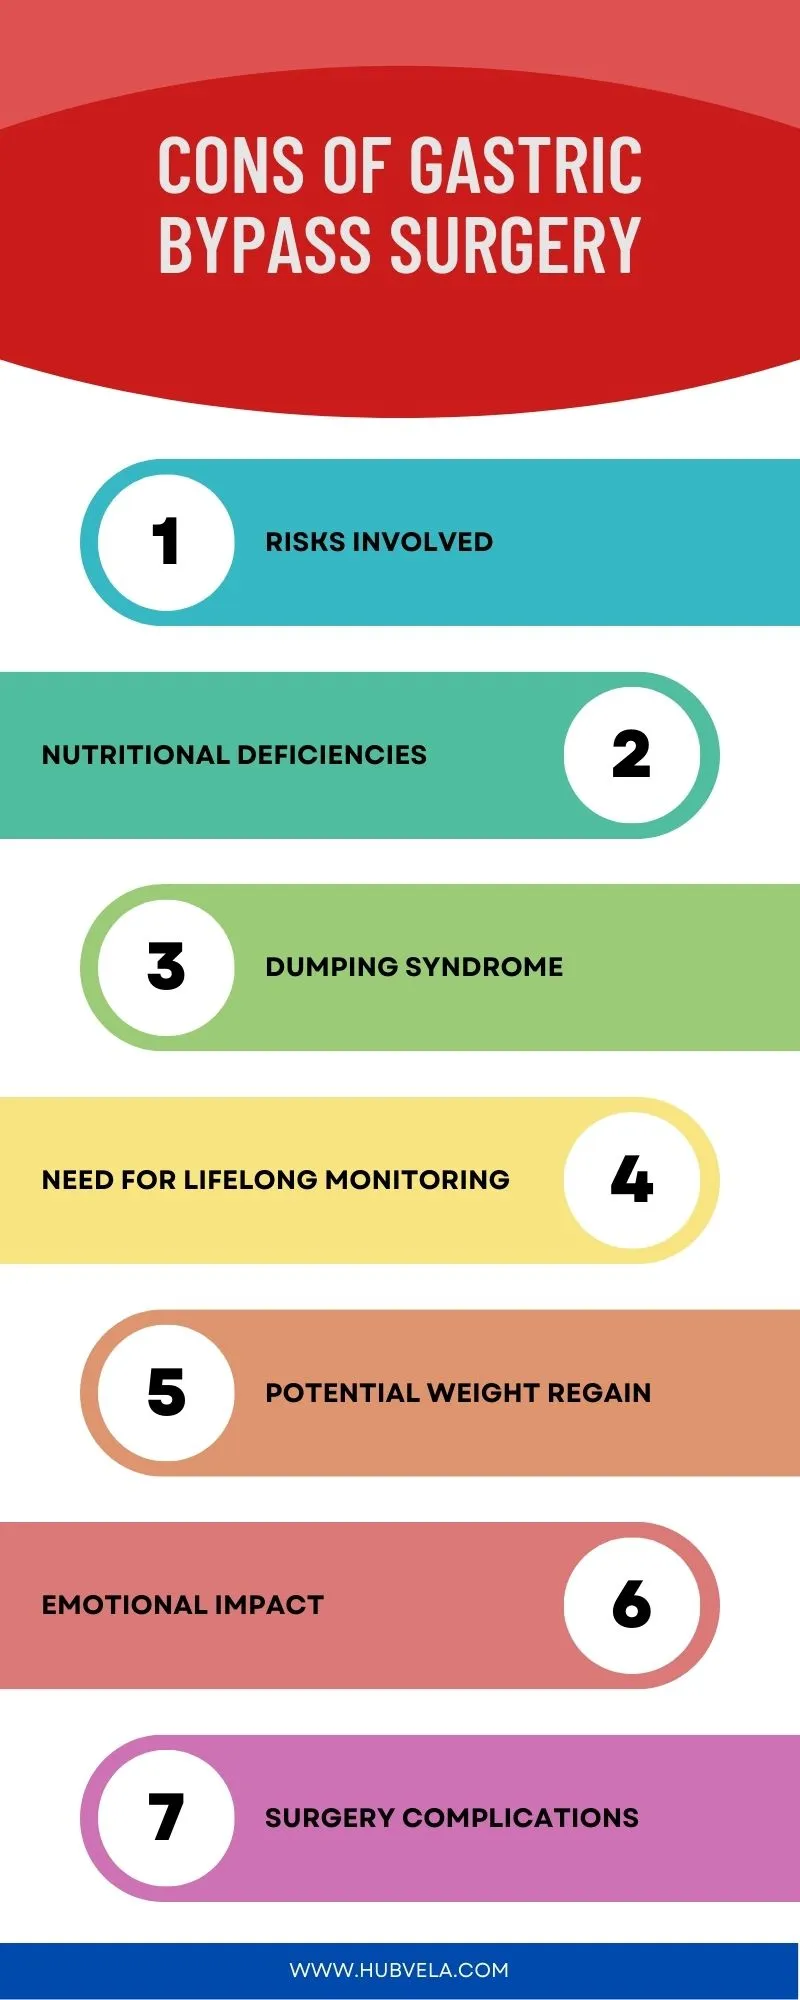 Cons Of Gastric Bypass Surgery Infographic